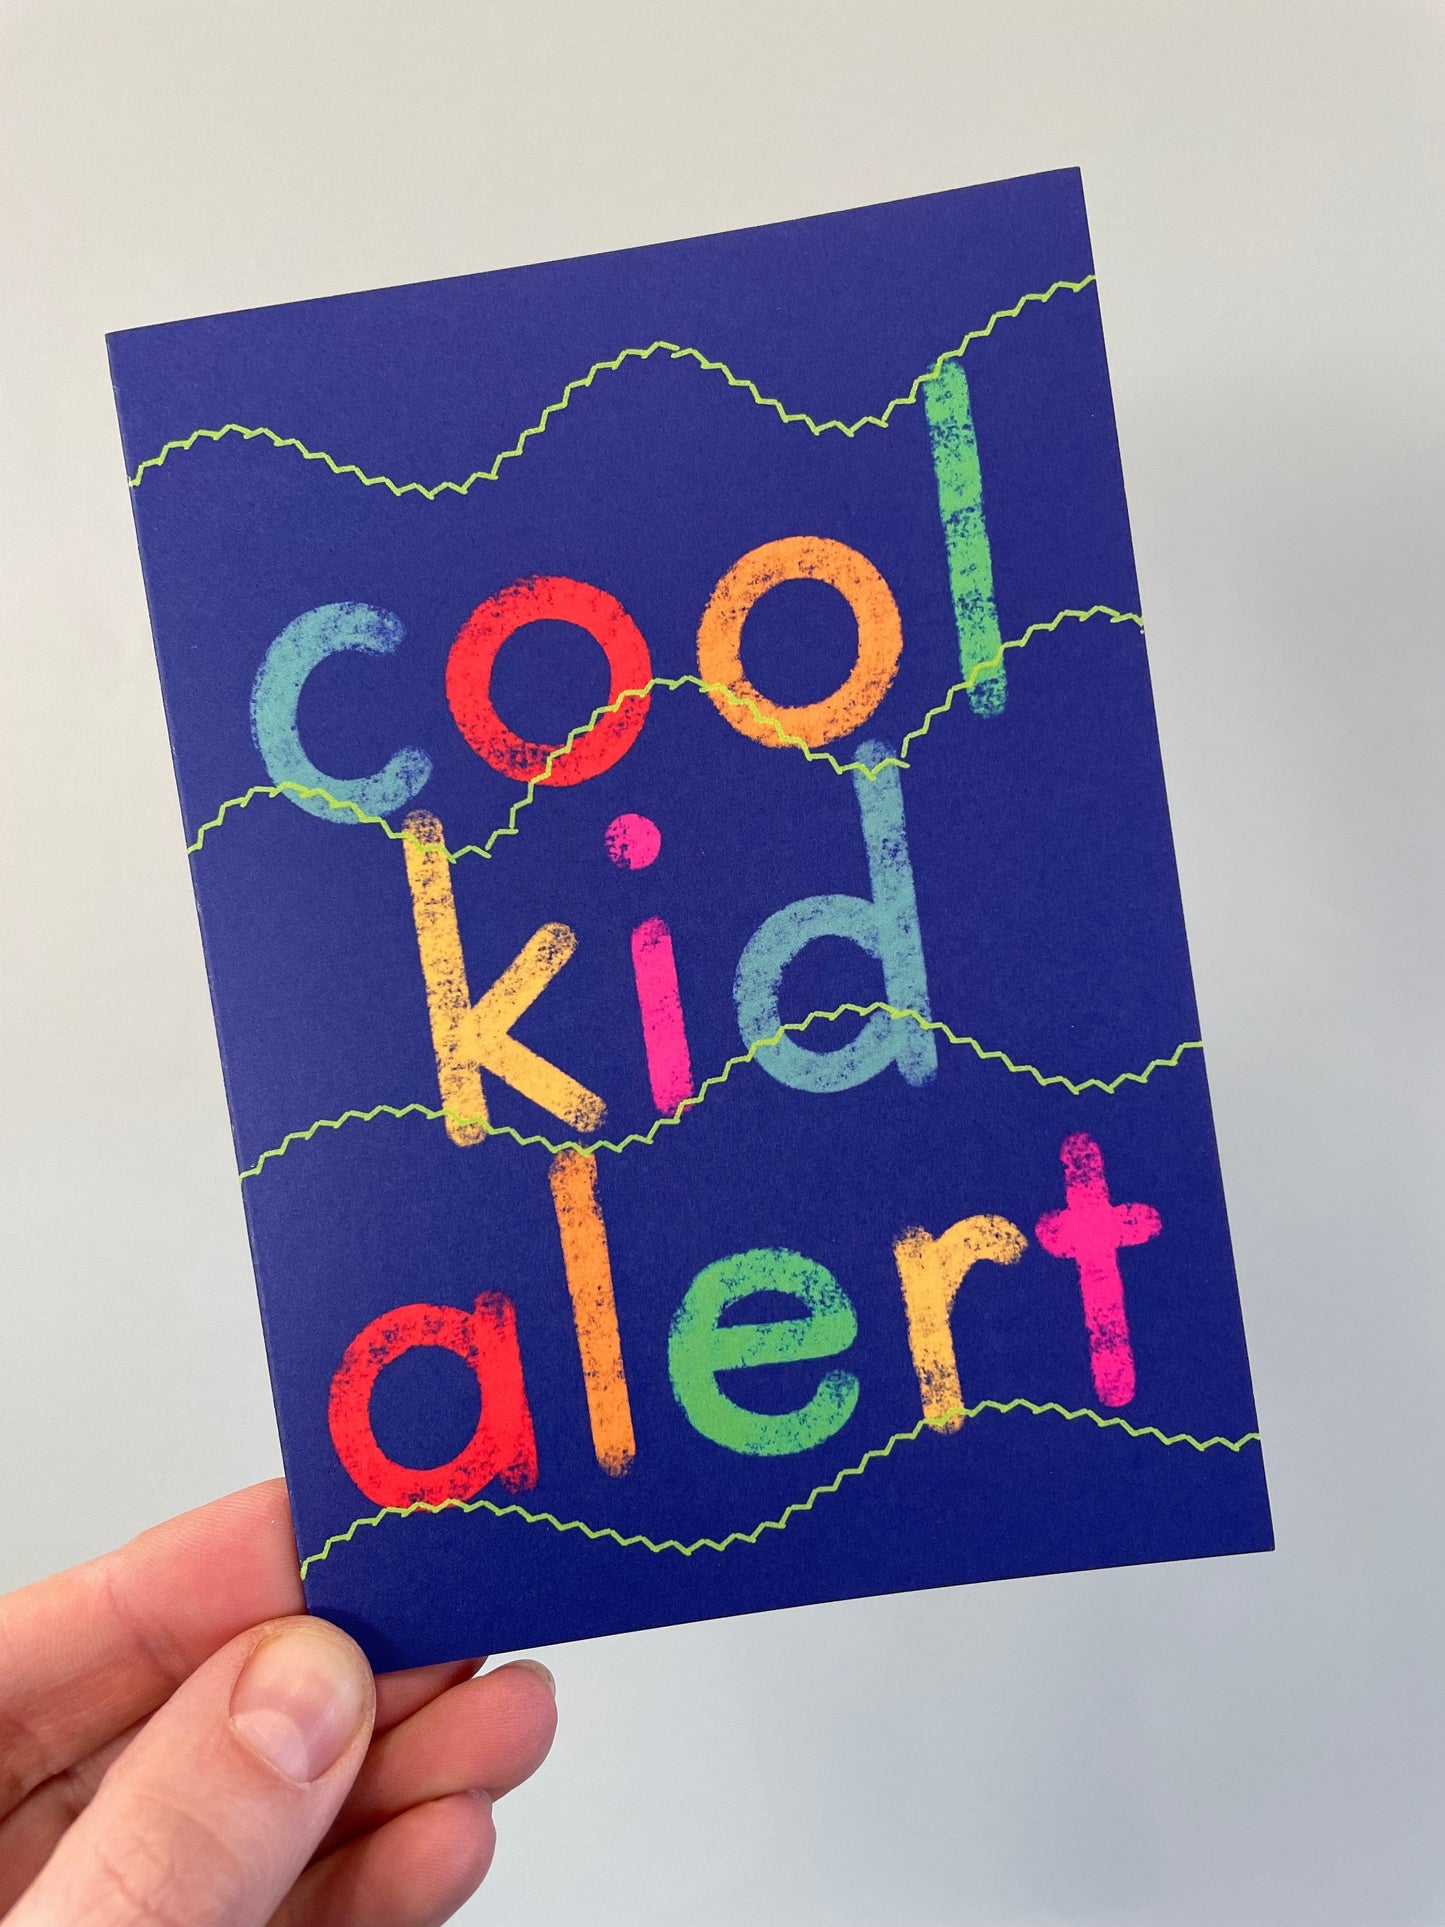 And Hope Designs Cards Cool Kid Alert bright card